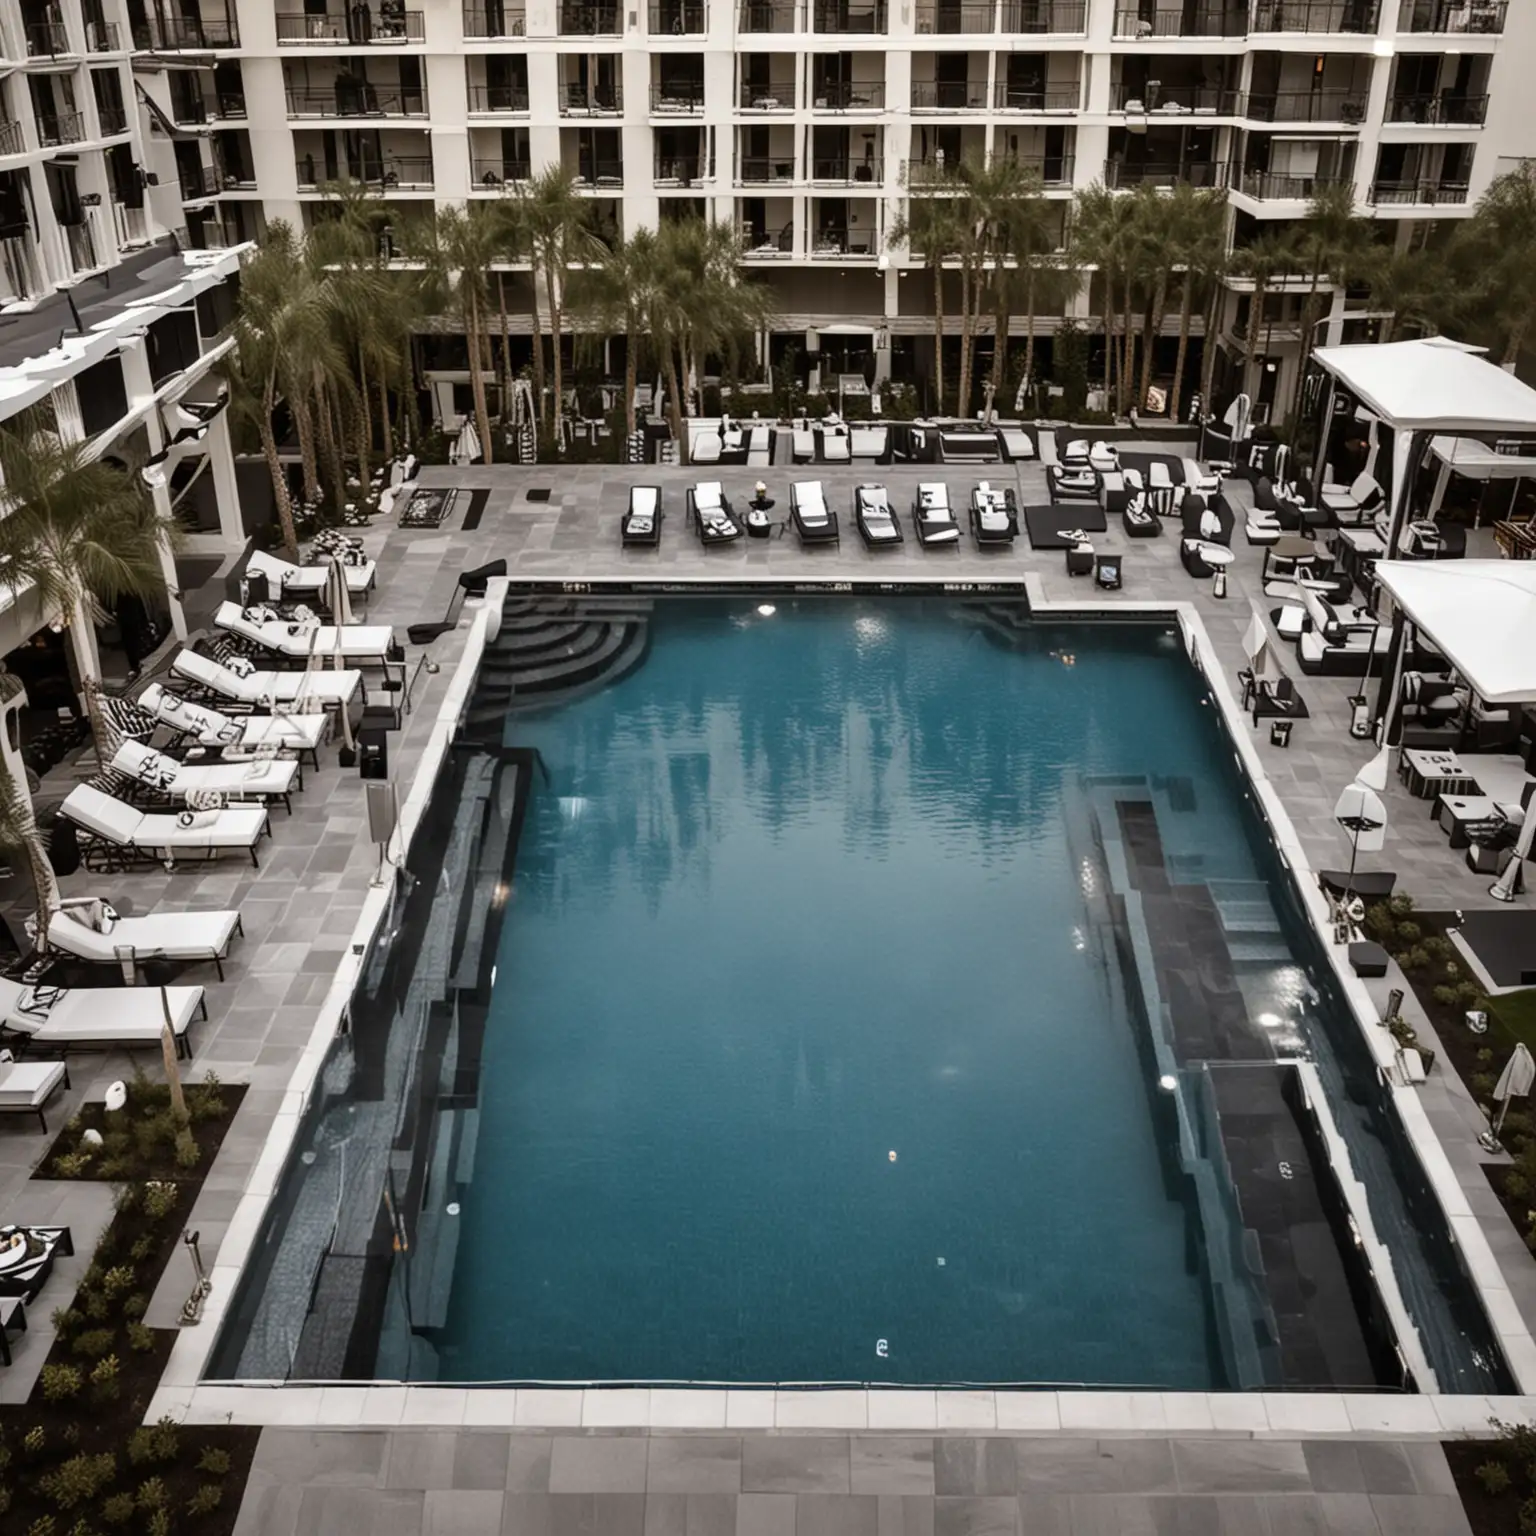 modern black and white 
outdoor pool design inspired by hard rock hotel and casino